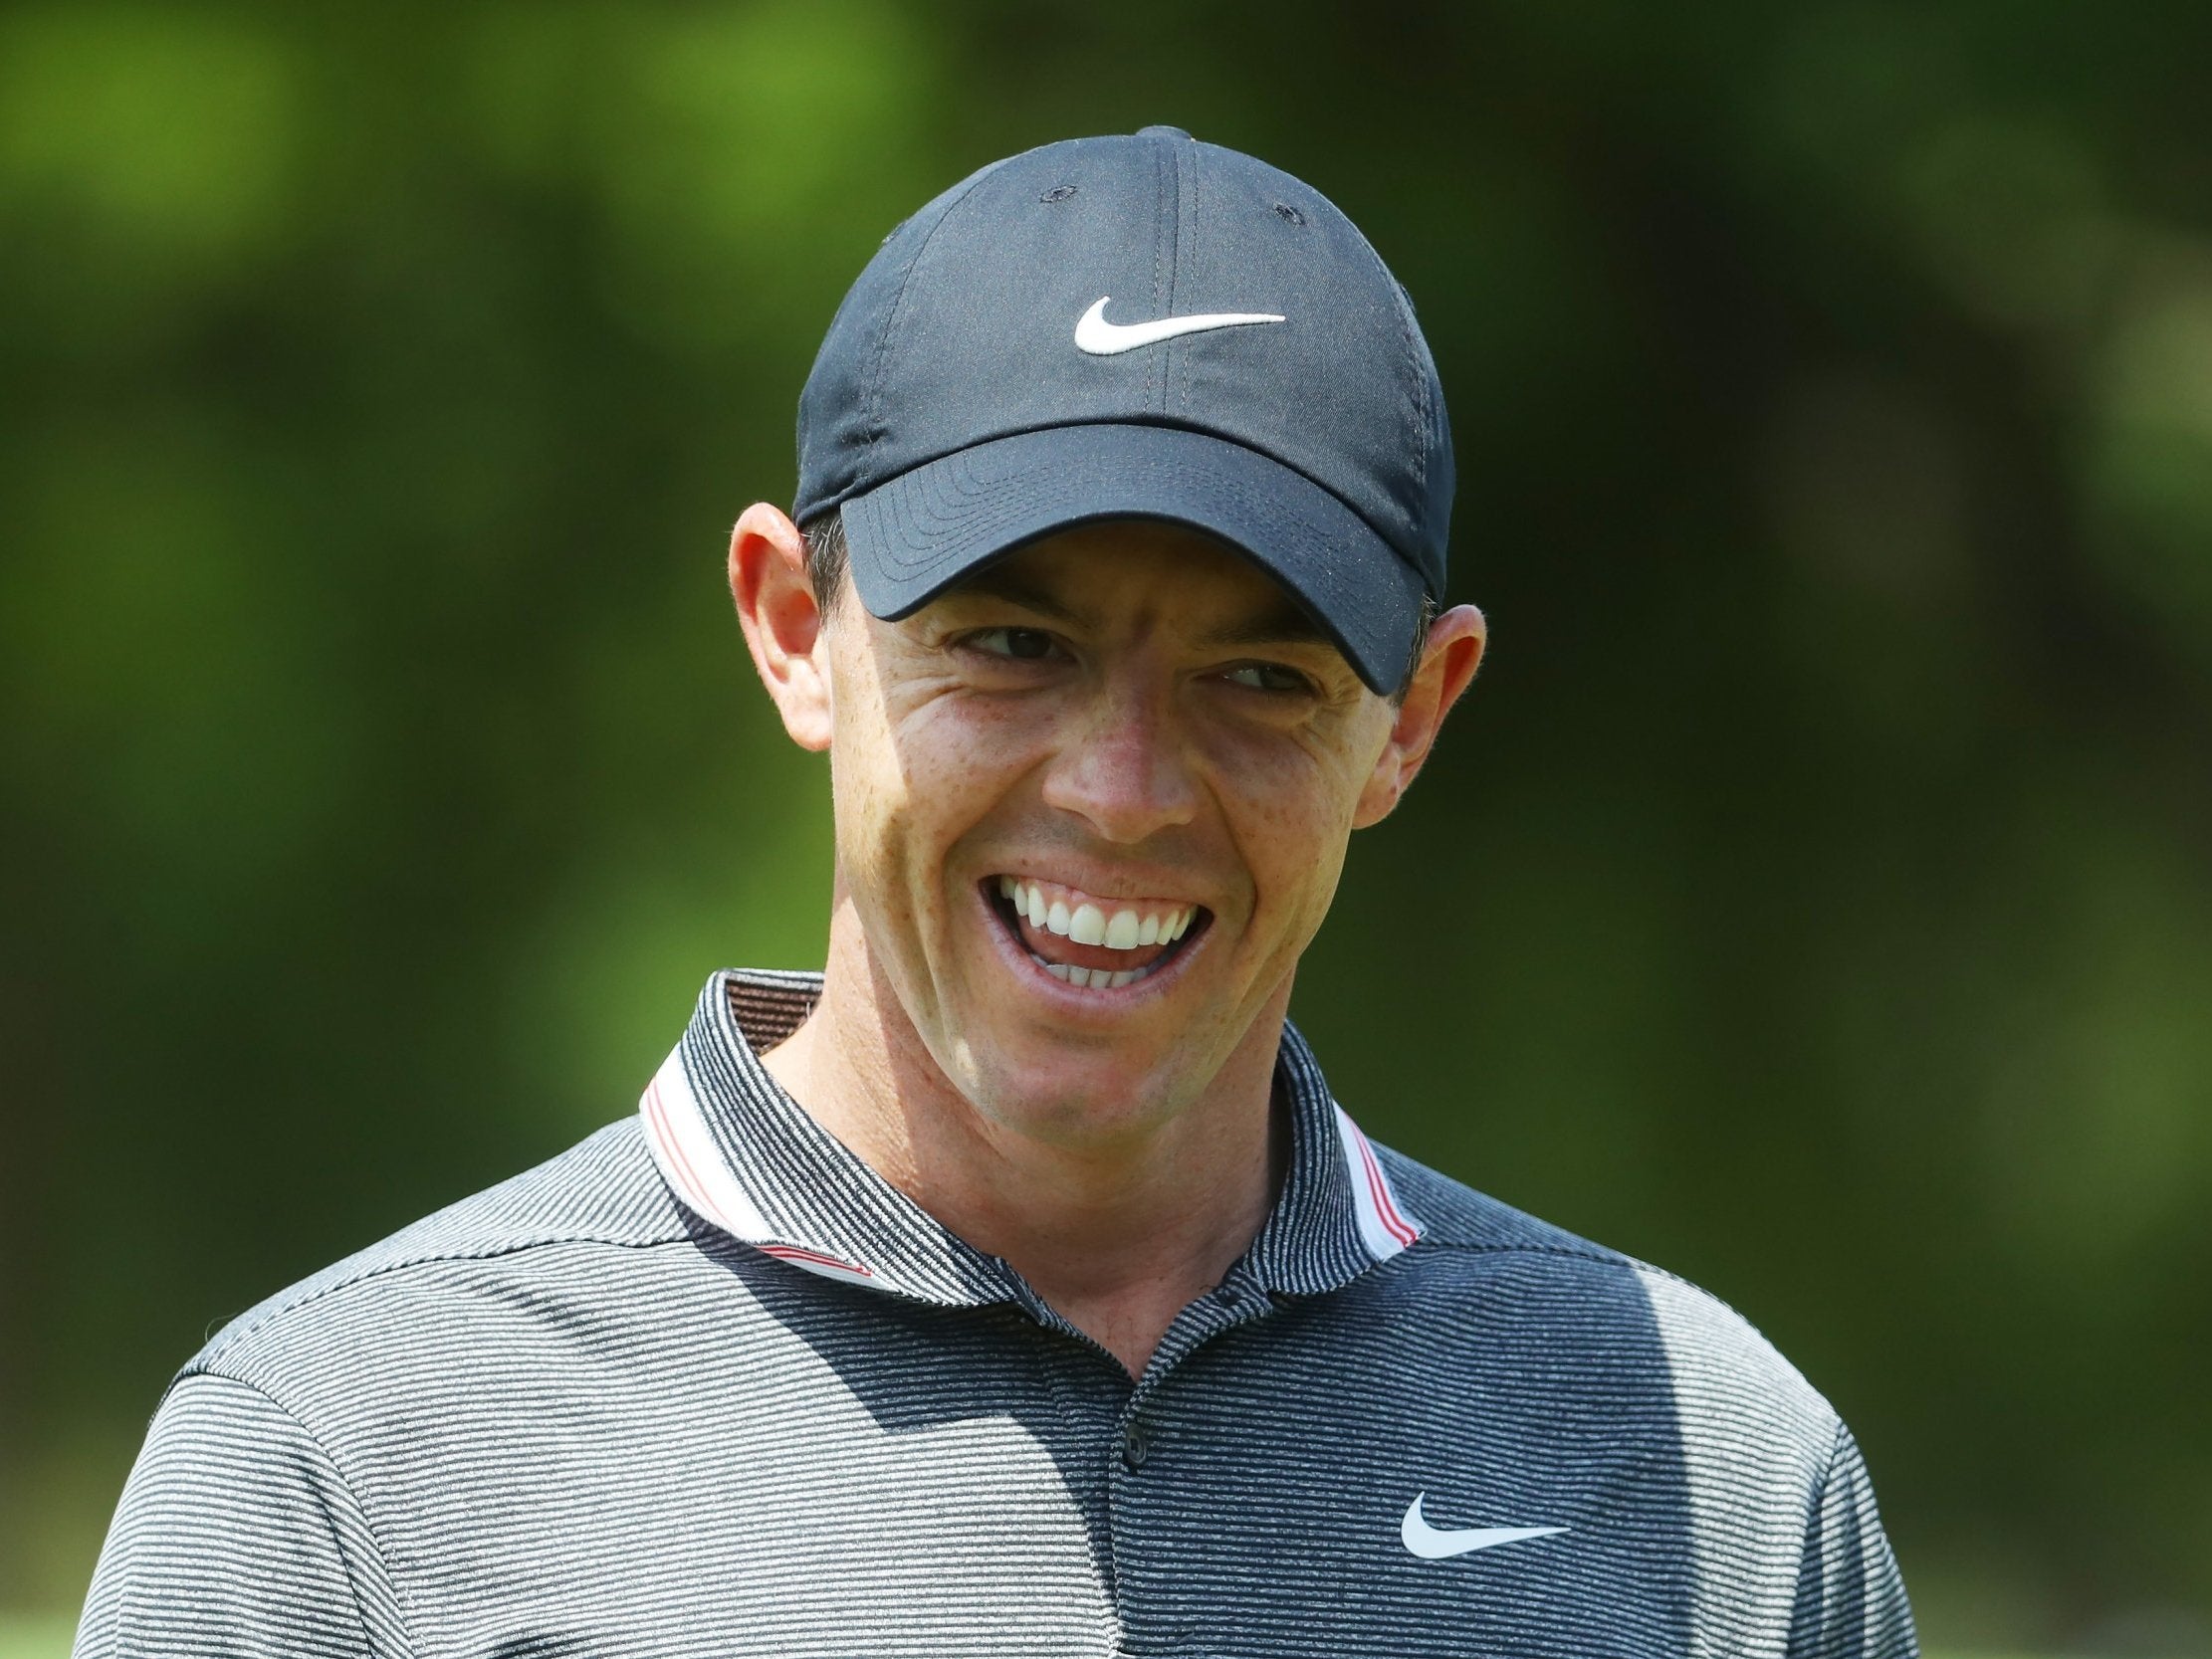 Rory McIlroy defeated Luke list to continue his strong run of form